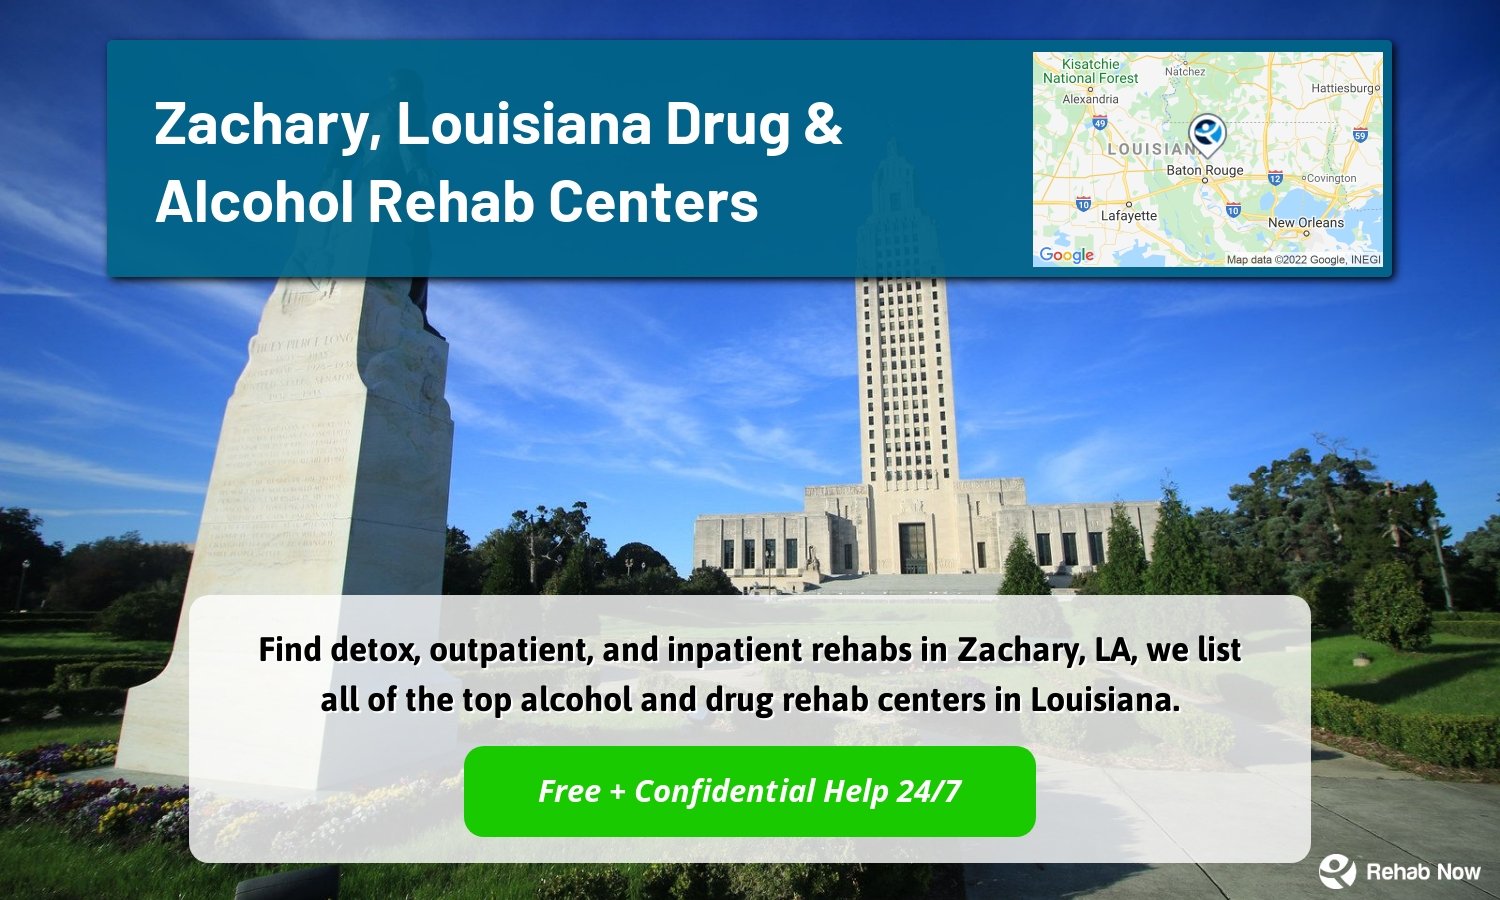 Find detox, outpatient, and inpatient rehabs in Zachary, LA, we list all of the top alcohol and drug rehab centers in Louisiana.